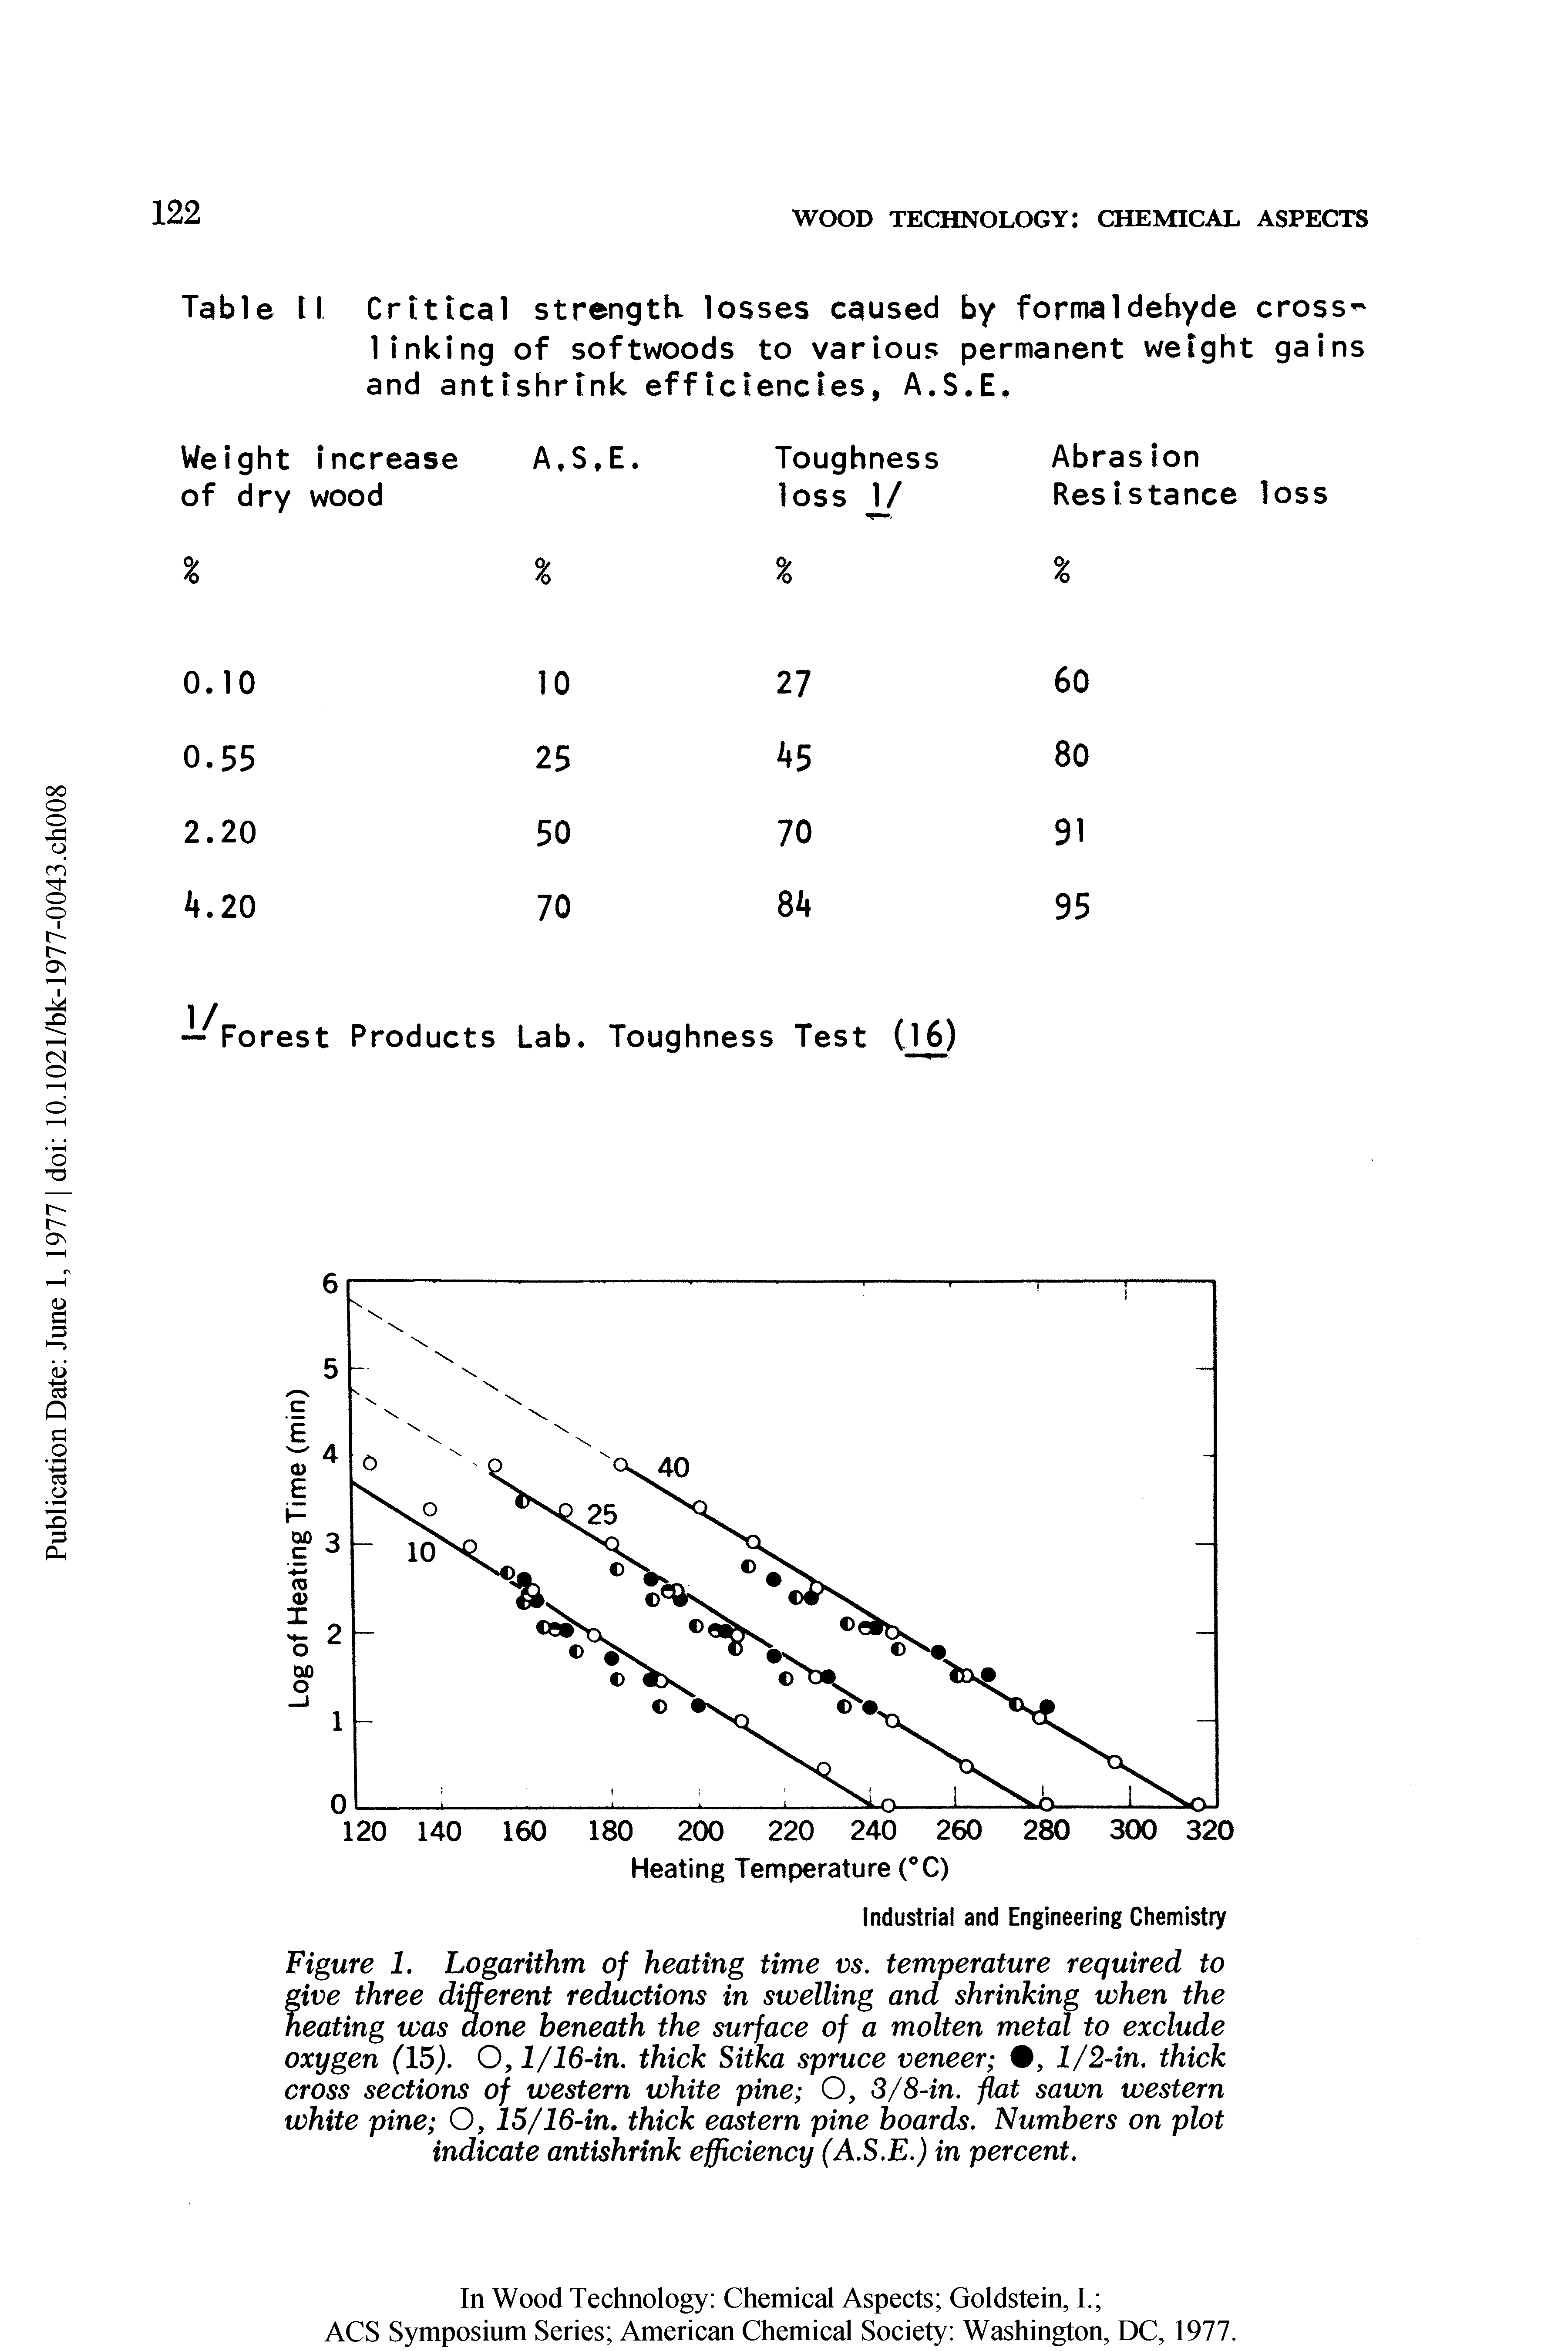 Figure 1. Logarithm of heating time vs. temperature required to give three different reductions in swelling and shrinking when the heating was done beneath the surface of a molten metal to exclude oxygen (15). 0,1/16-in. thick Sitka spruce veneer , 1/2-in. thick cross sections of western white pine O, 3/8-in. flat sawn western white pine O, 15/16-in. thick eastern pine boards. Numbers on plot indicate antishrink efficiency (A.S.E.) in percent.